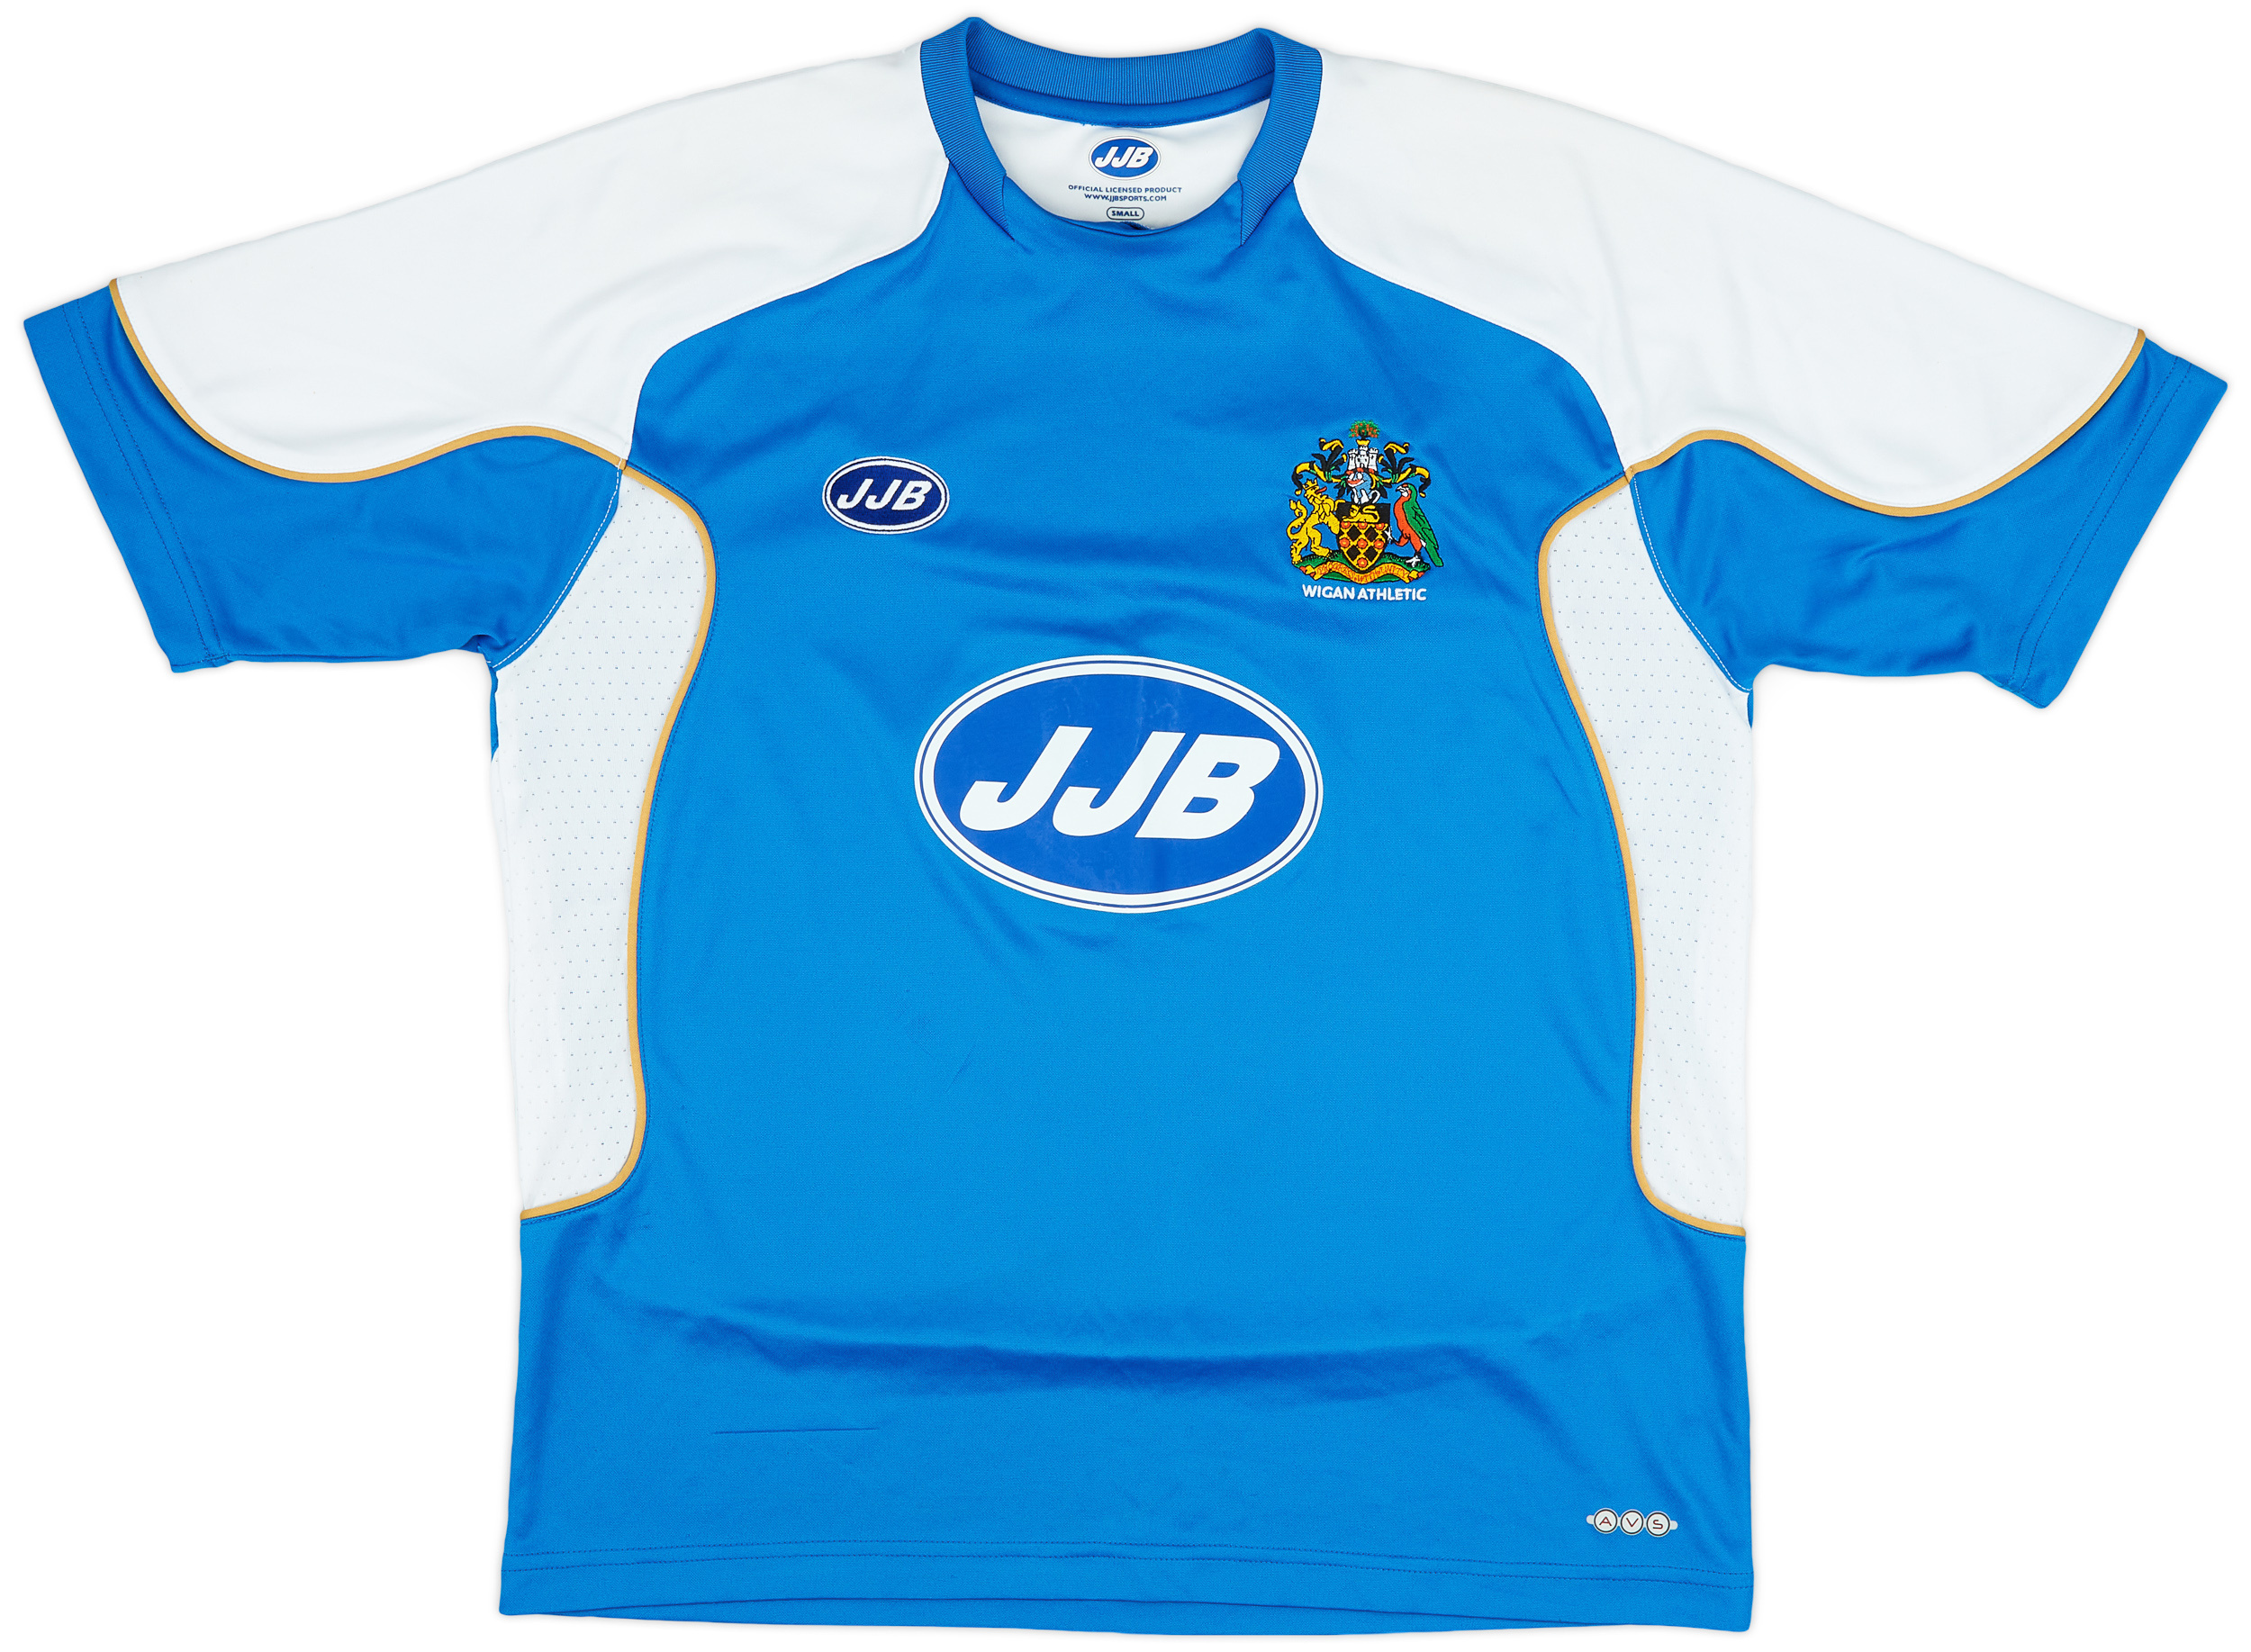 2006-07 Wigan Athletic Home Shirt - 9/10 - ()